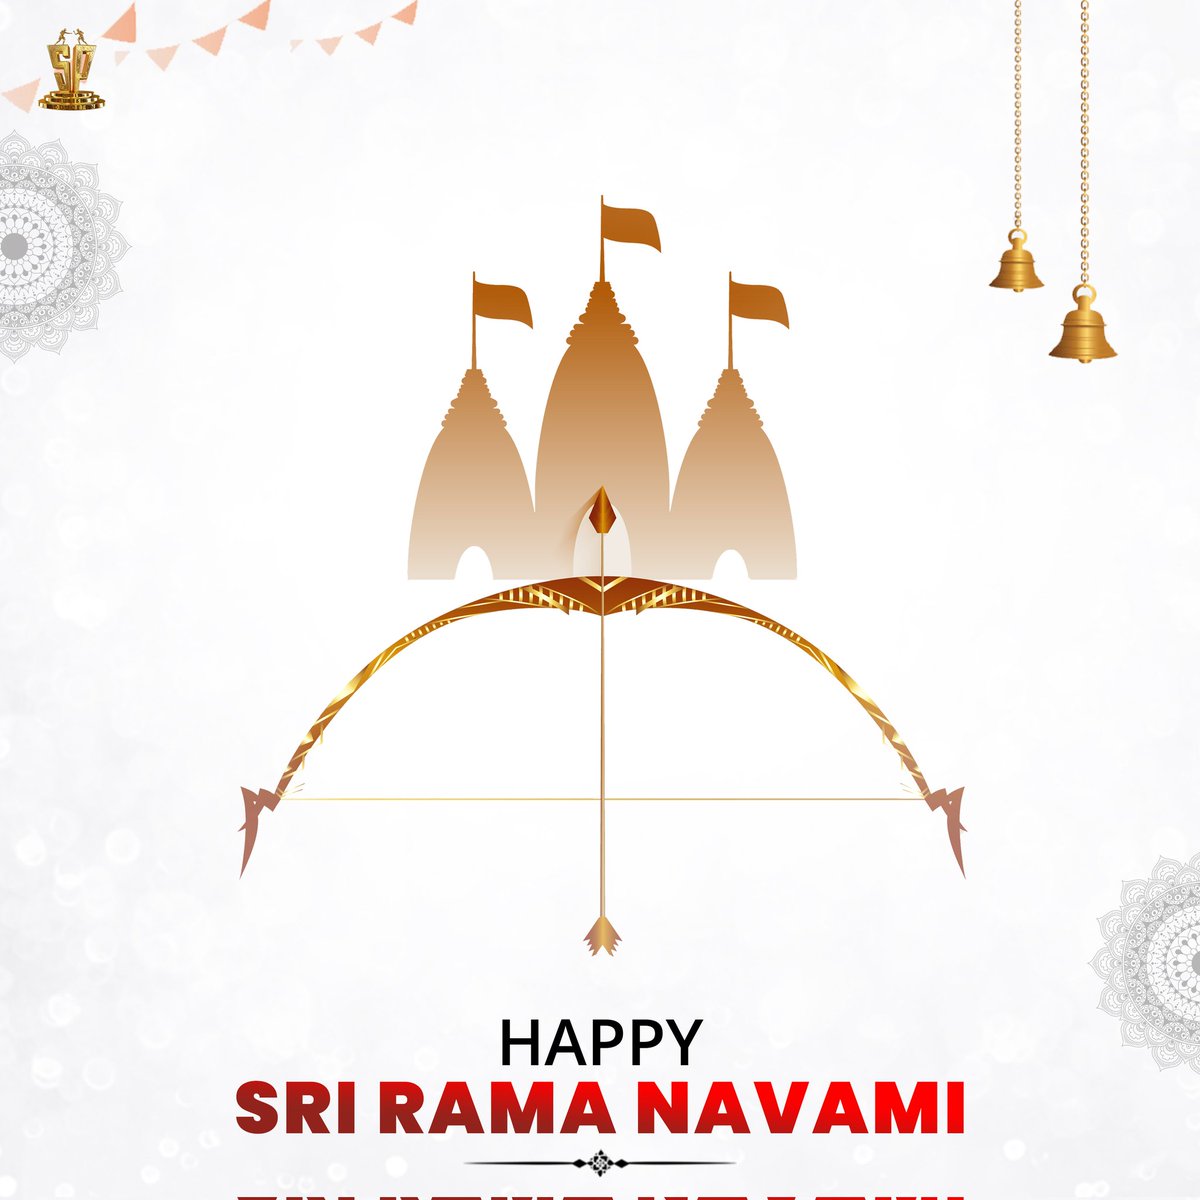 May the bow of Lord Rama’s strength inspire you to overcome all obstacles with courage and determination. A very Happy Sri Ram Navami to all! #SriRamNavami